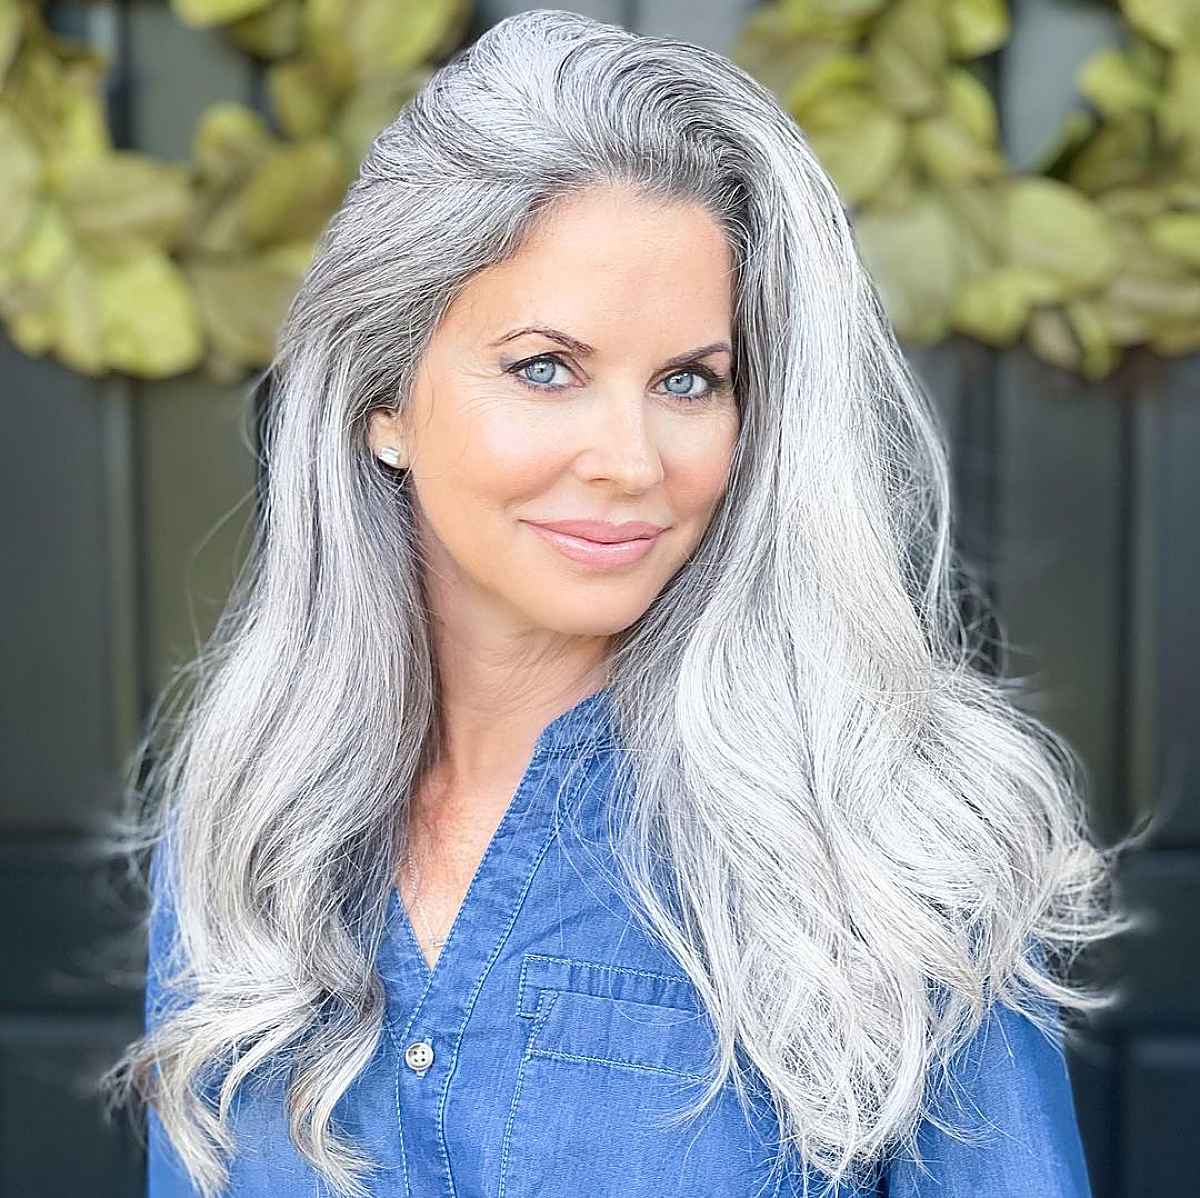 Long Hairstyle for Women Over 50 with Large Foreheads